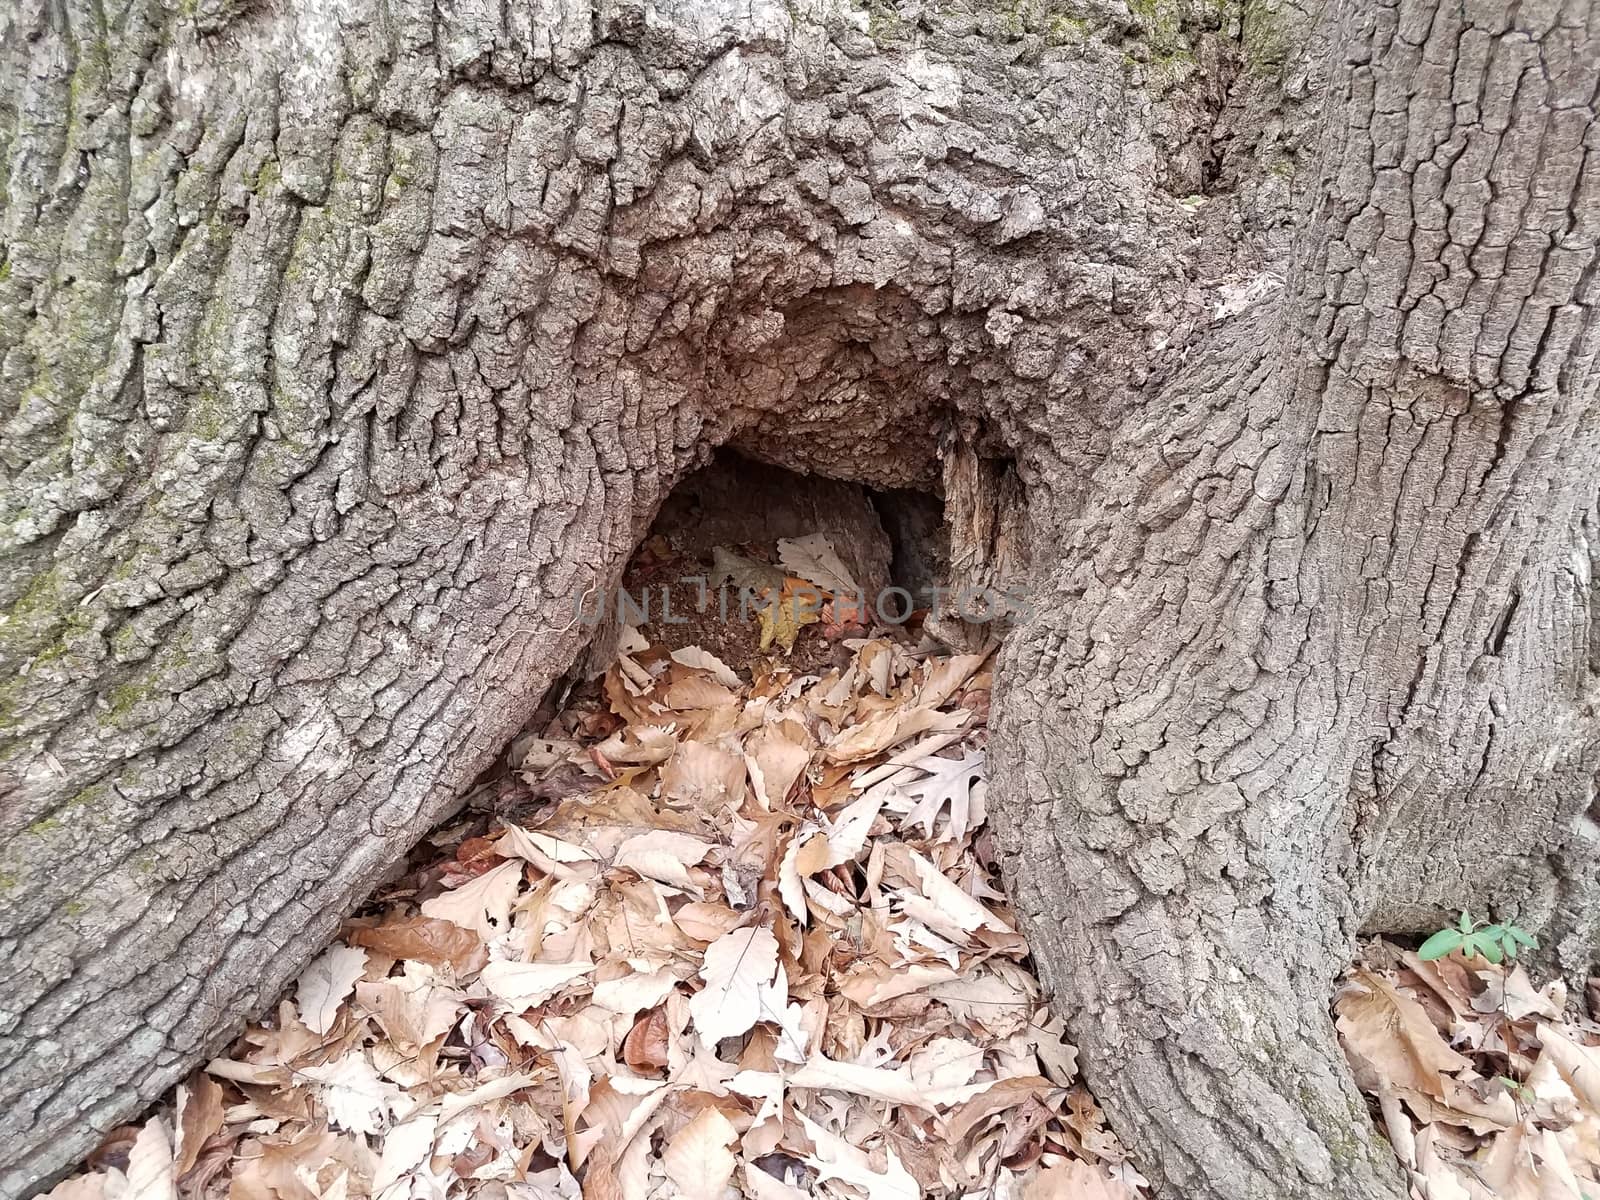 hollow at base of tree with fallen brown leaves by stockphotofan1